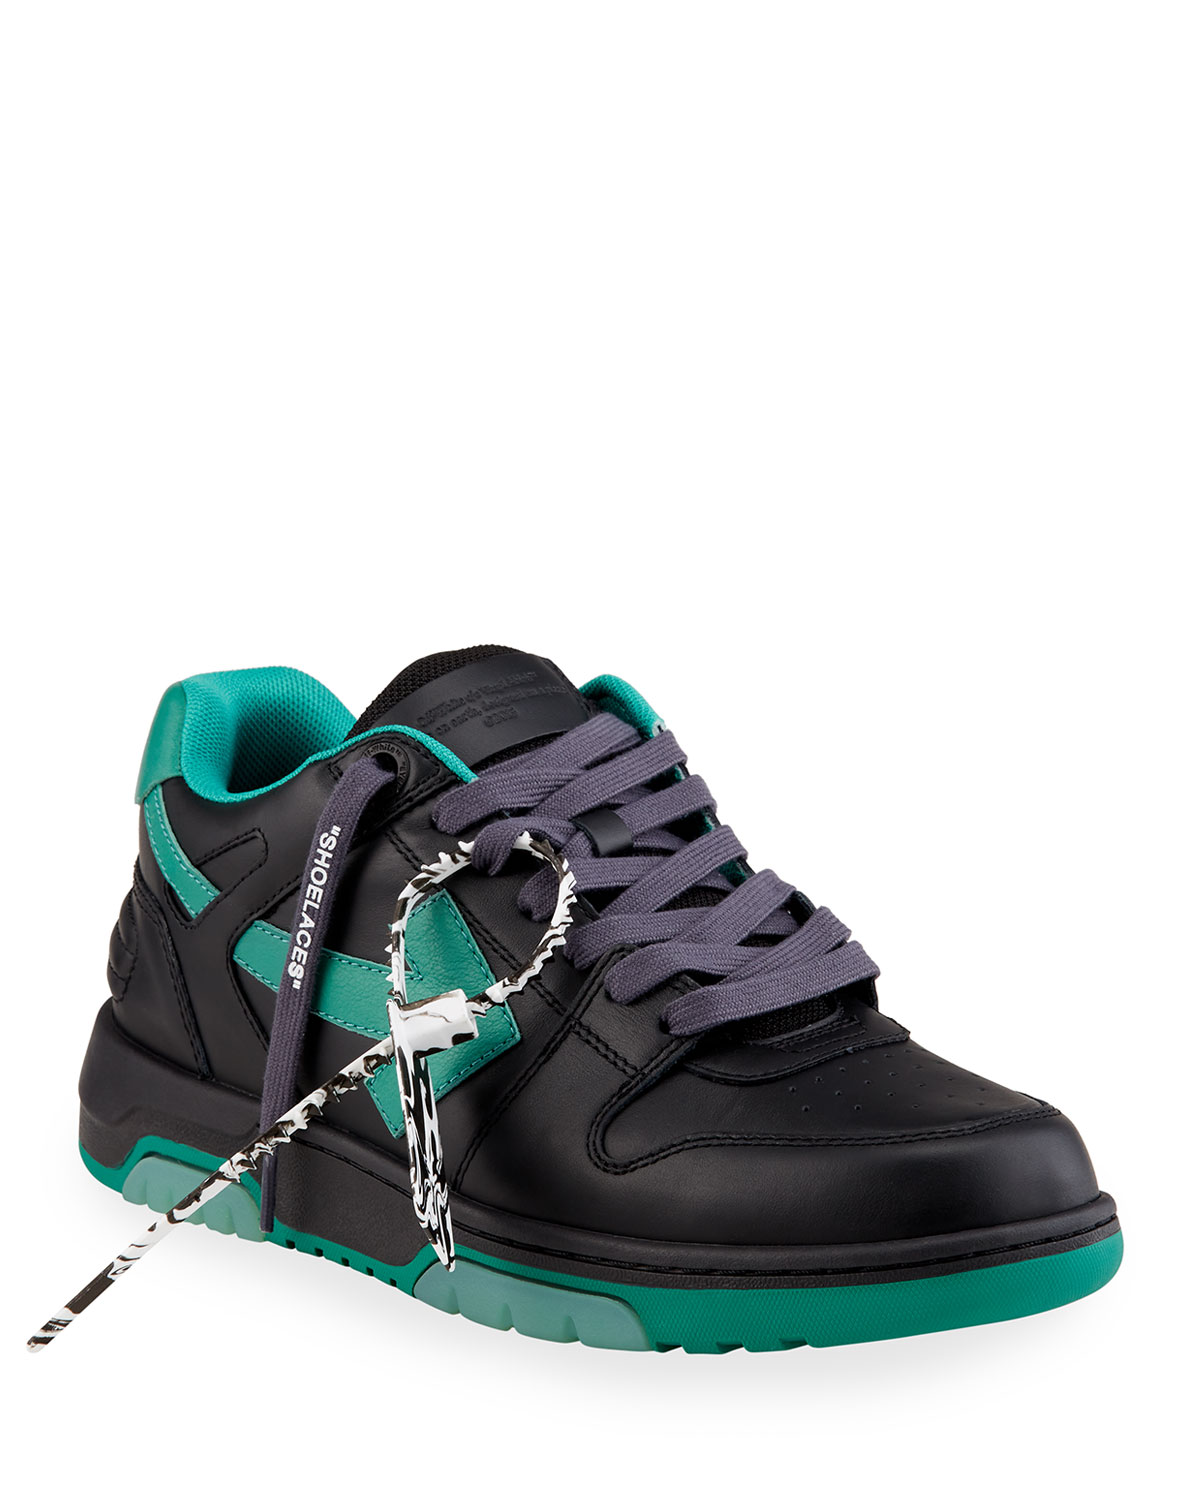 Off-White MEN'S OUT OF OFFICE ARROW LEATHER SNEAKERS